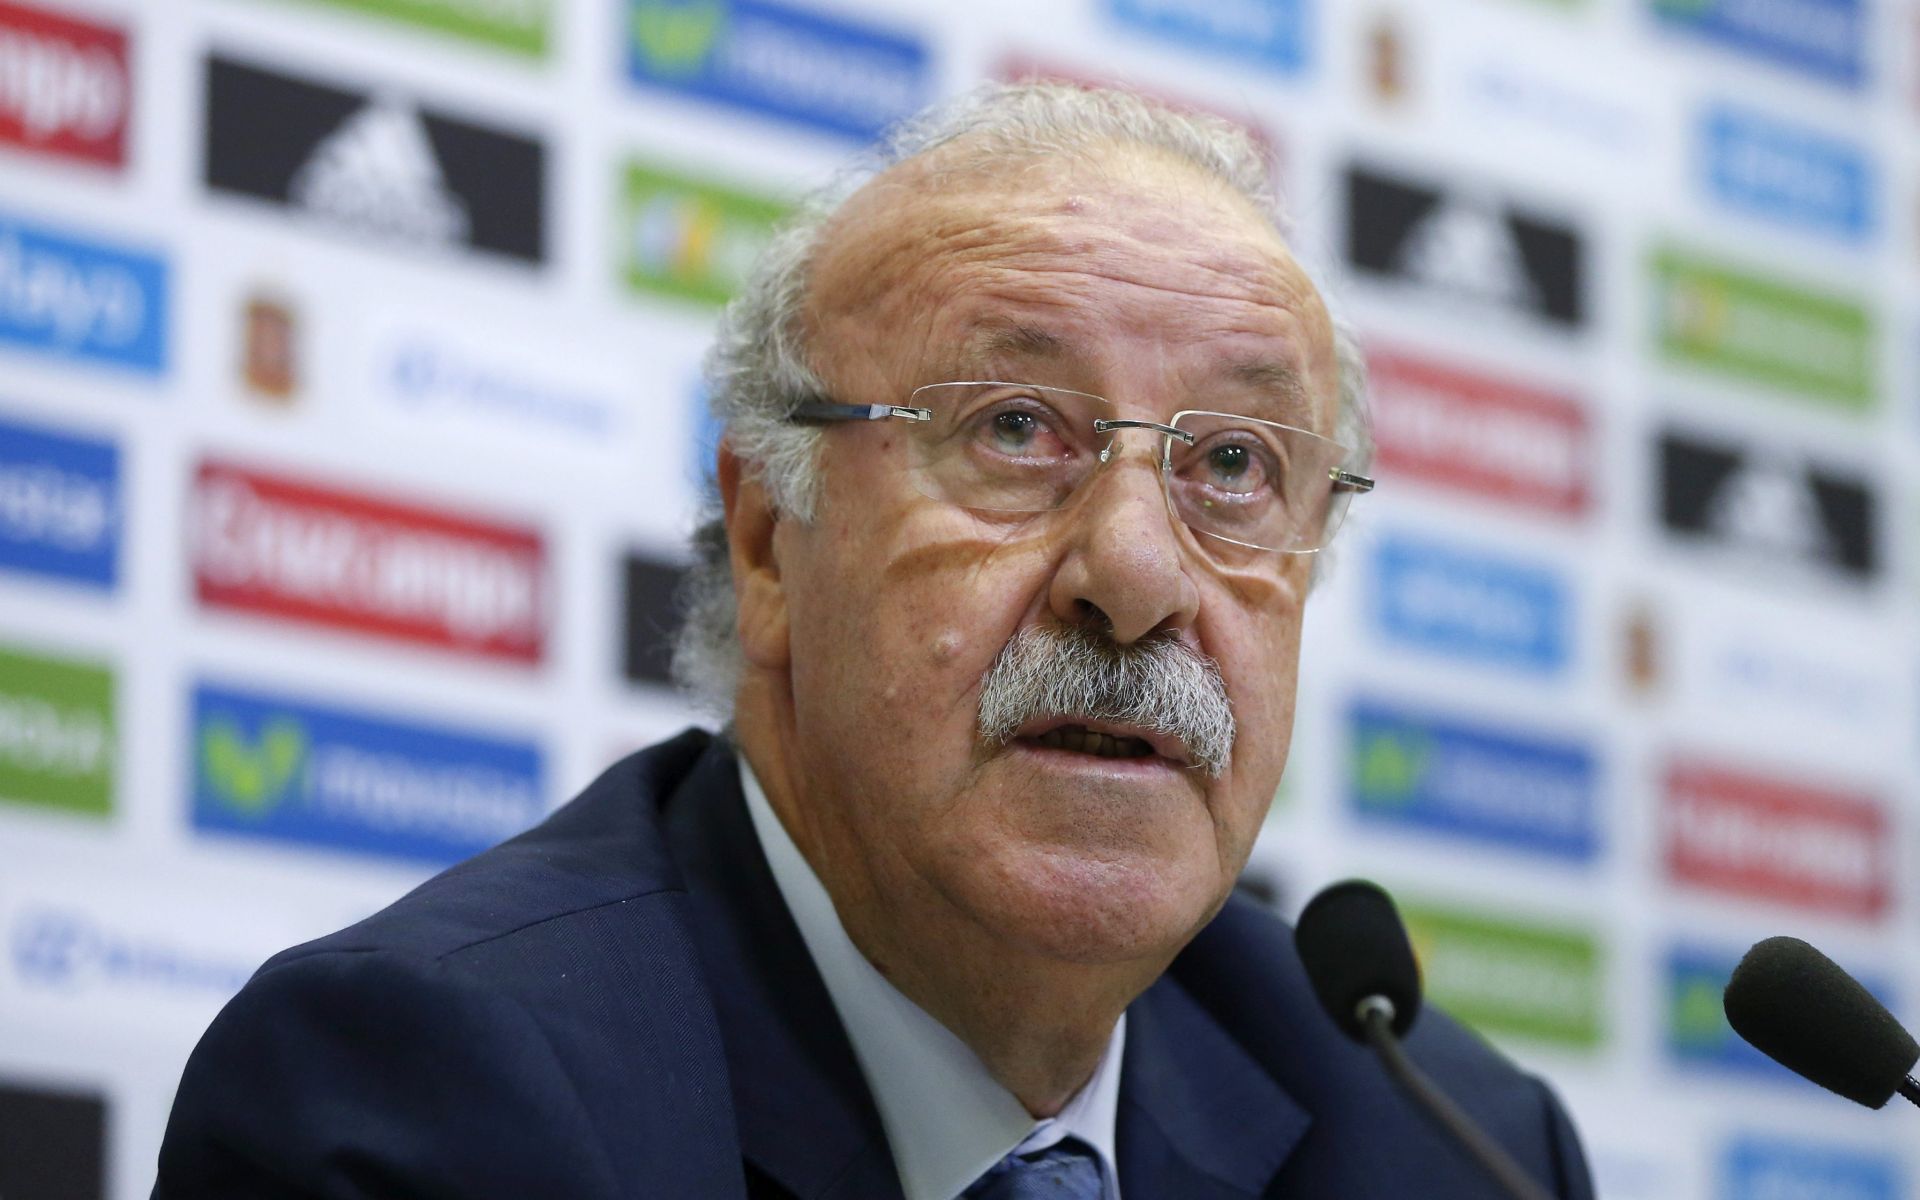 epa05311805 Spain's head coach Vicente del Bosque holds a press conference to announce the squad for the UEFA Euro 2016, in Madrid, Spain, 17 May 2016. The 2016 UEFA European Championship will be held in France from 10 June to 10 July 2016.  EPA/JUAN CARLOS HIDALGO